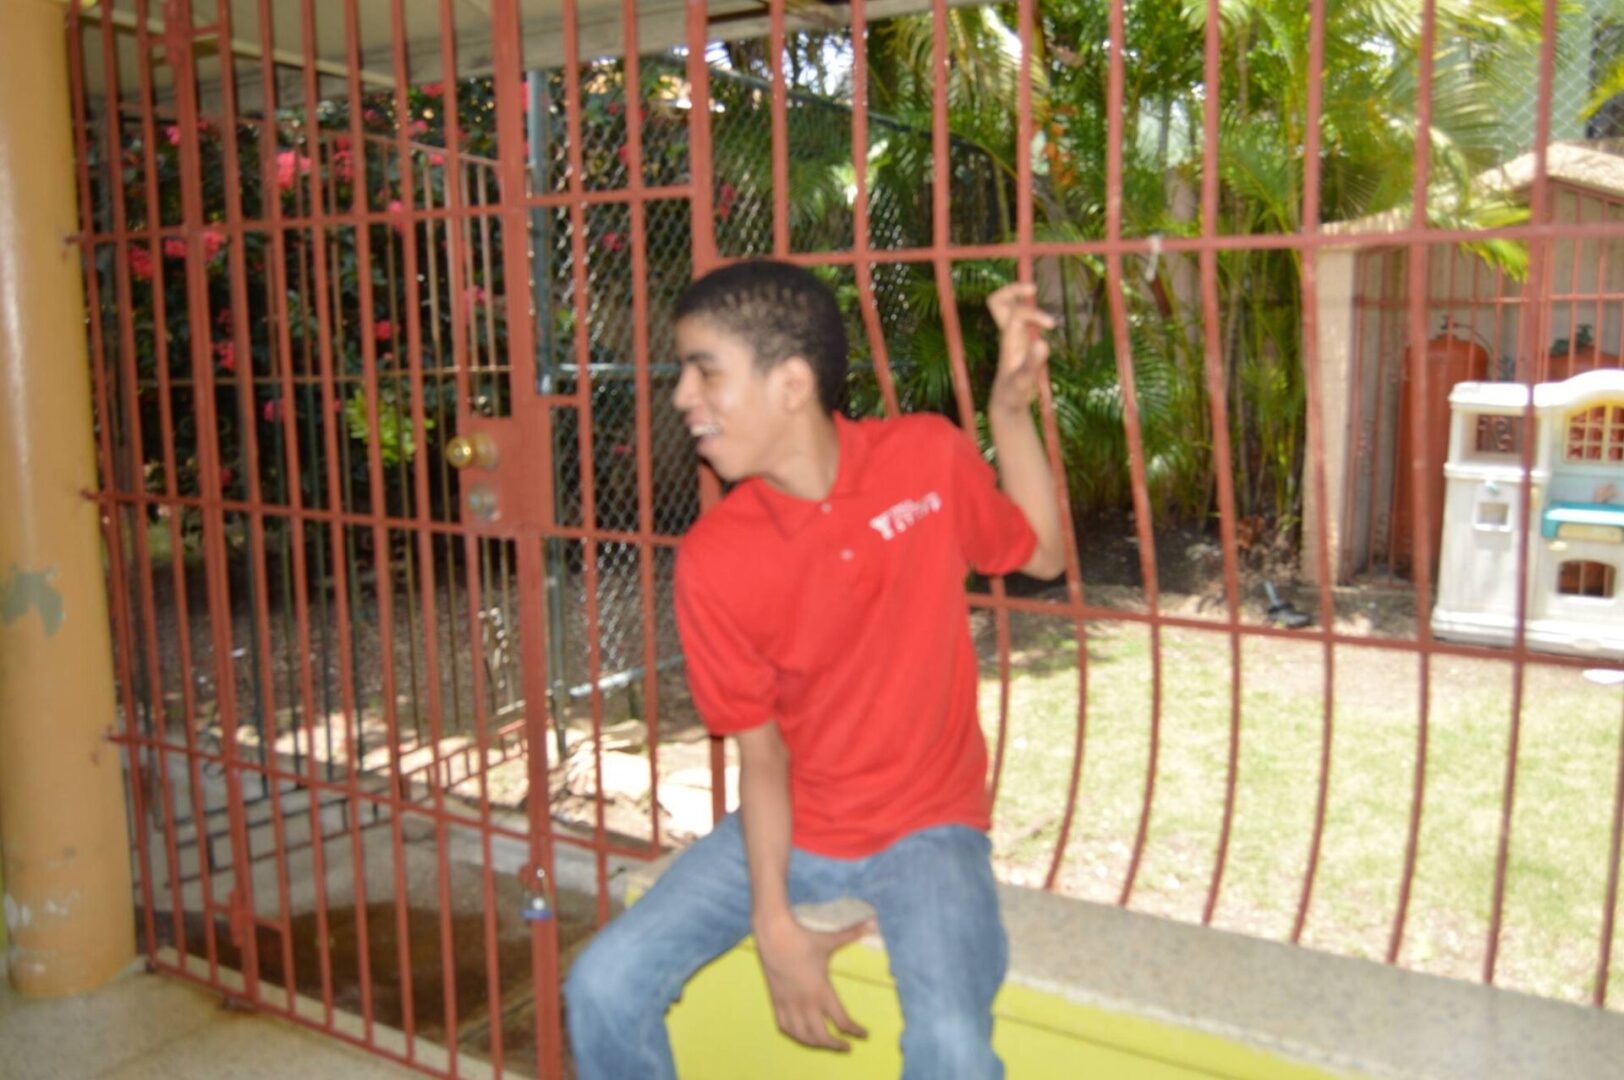 A boy in a red shirt sitting near the window bars, smiling